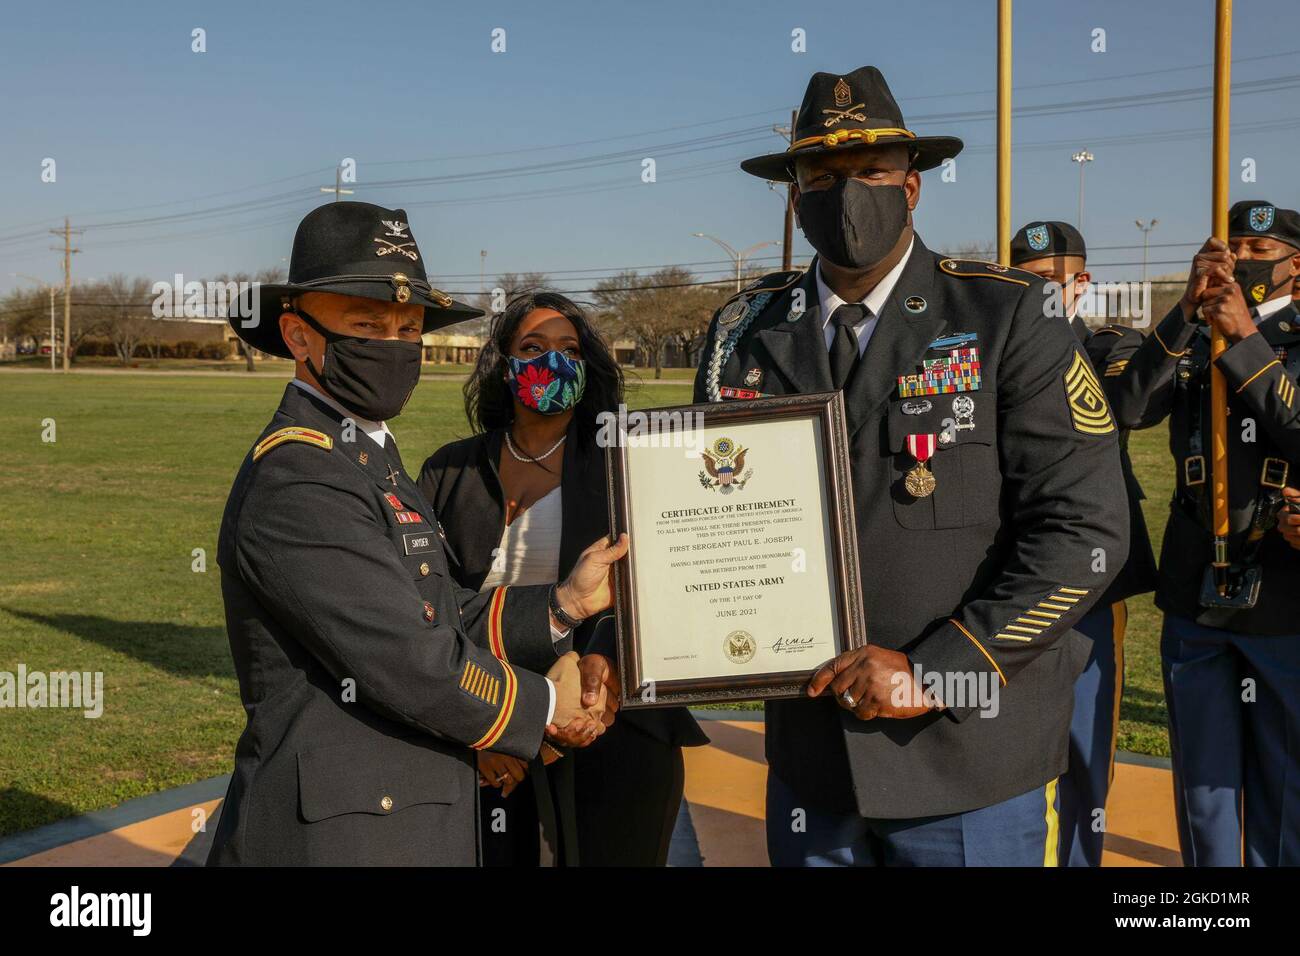 Col. Neil Snyder, 1st Cavalry Division Artillery commander, pose with First Sergeant Paul E. Joseph and his wife, Veronica, after receiving his Certificate of Retirement during the division's Distinguished Service Recognition Ceremony on Cooper Field, Fort Hood, TX, March 17, 2021. Stock Photo